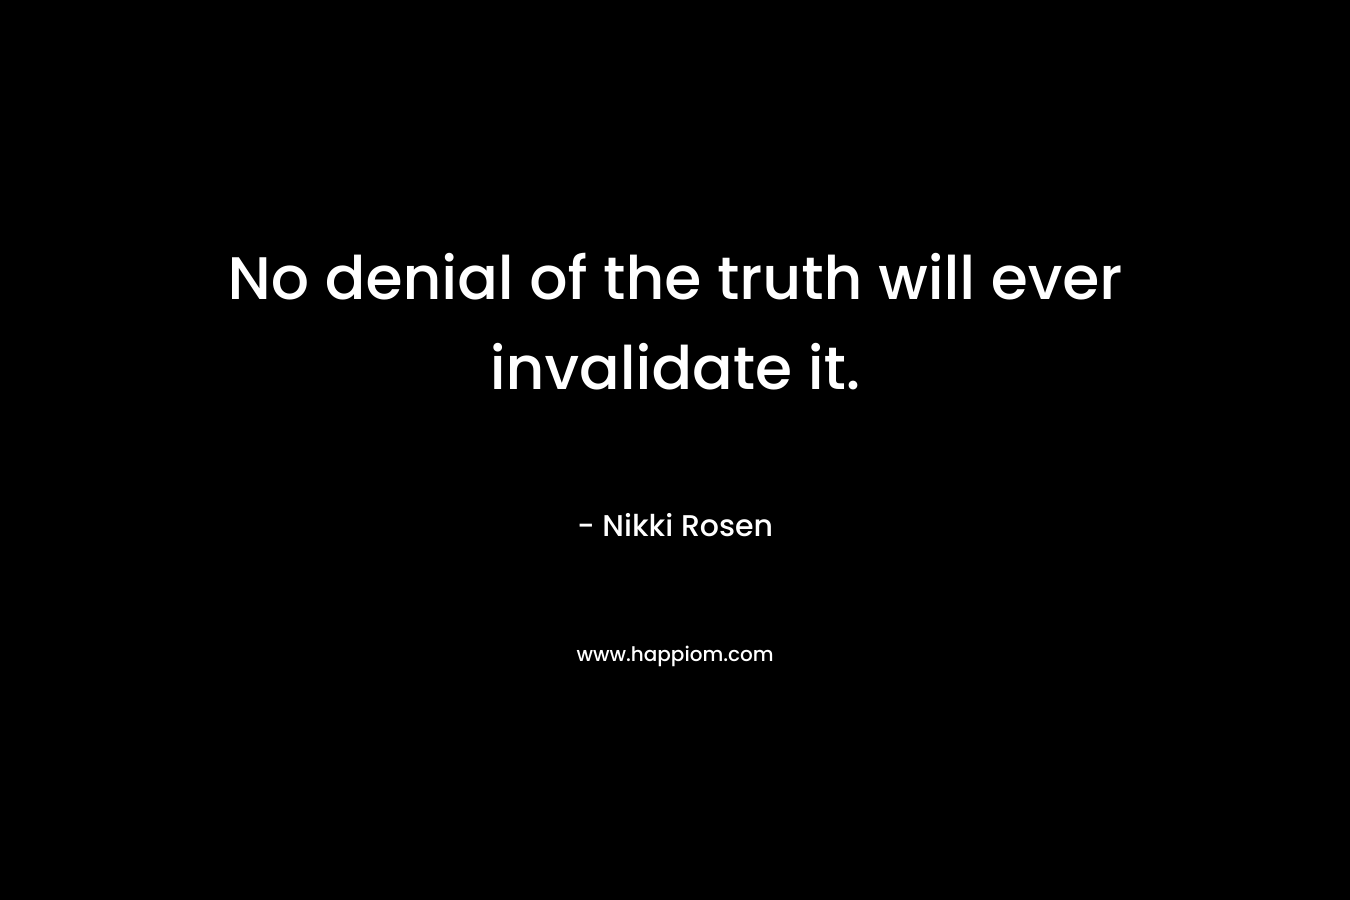 No denial of the truth will ever invalidate it.